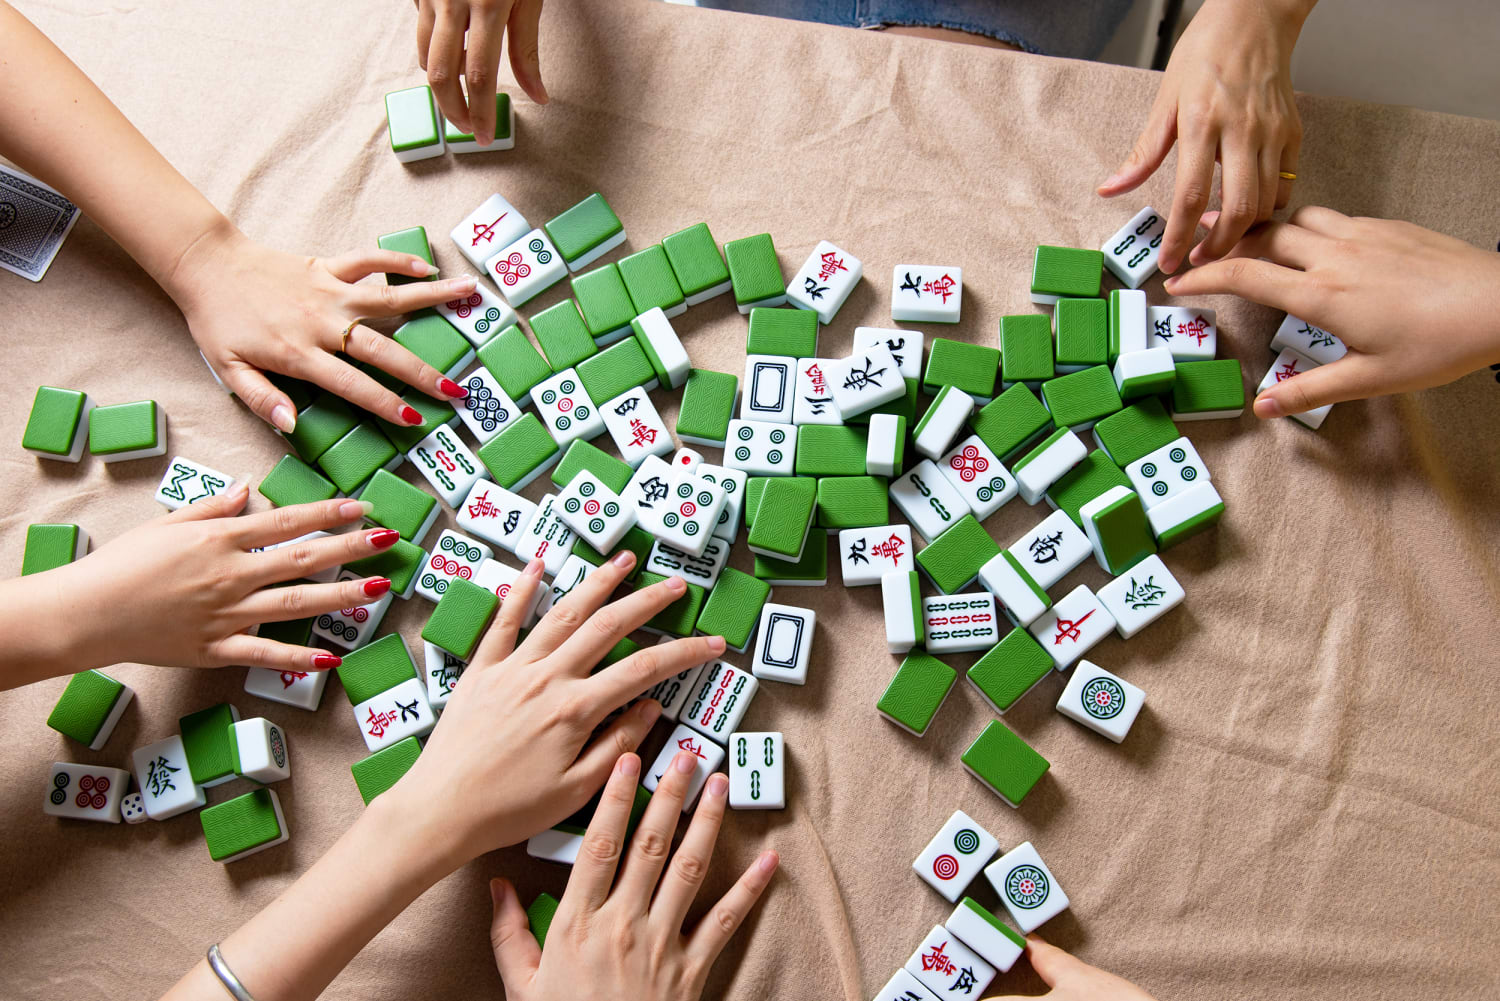 Mahjong design 'refresh' by US company reignites debate over